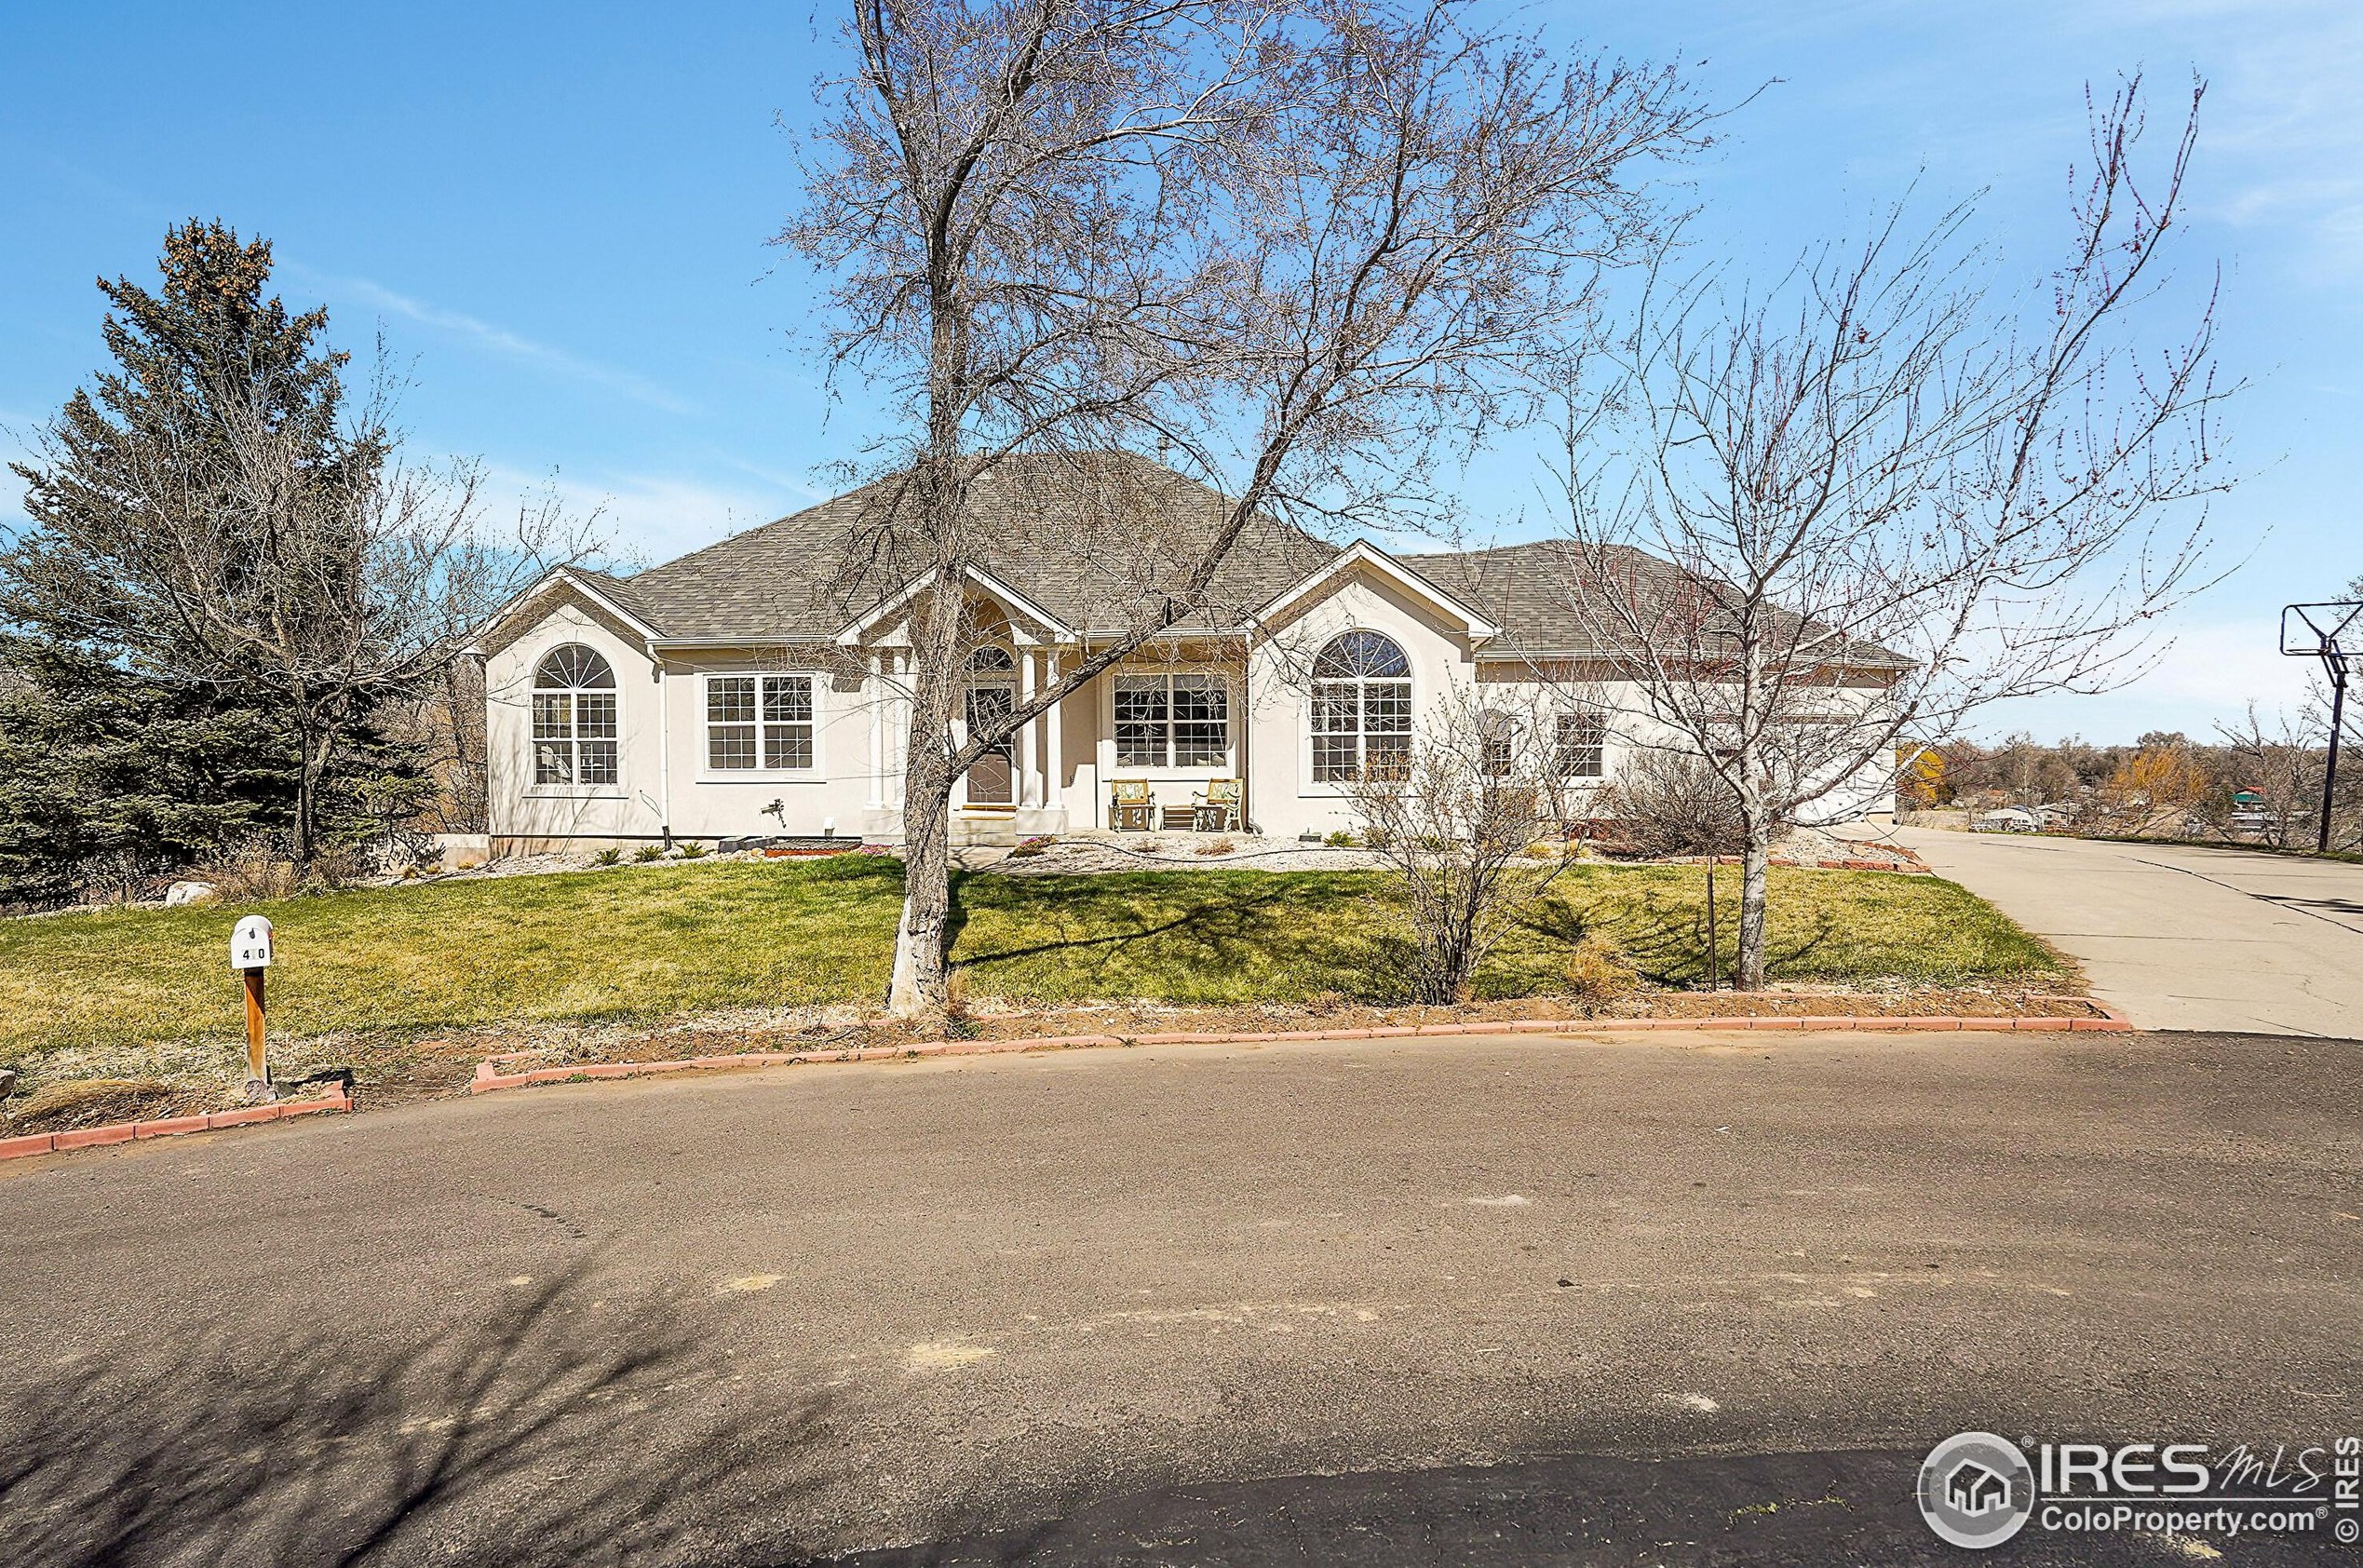 410 High Ct, Fort Collins, CO 80521-1402